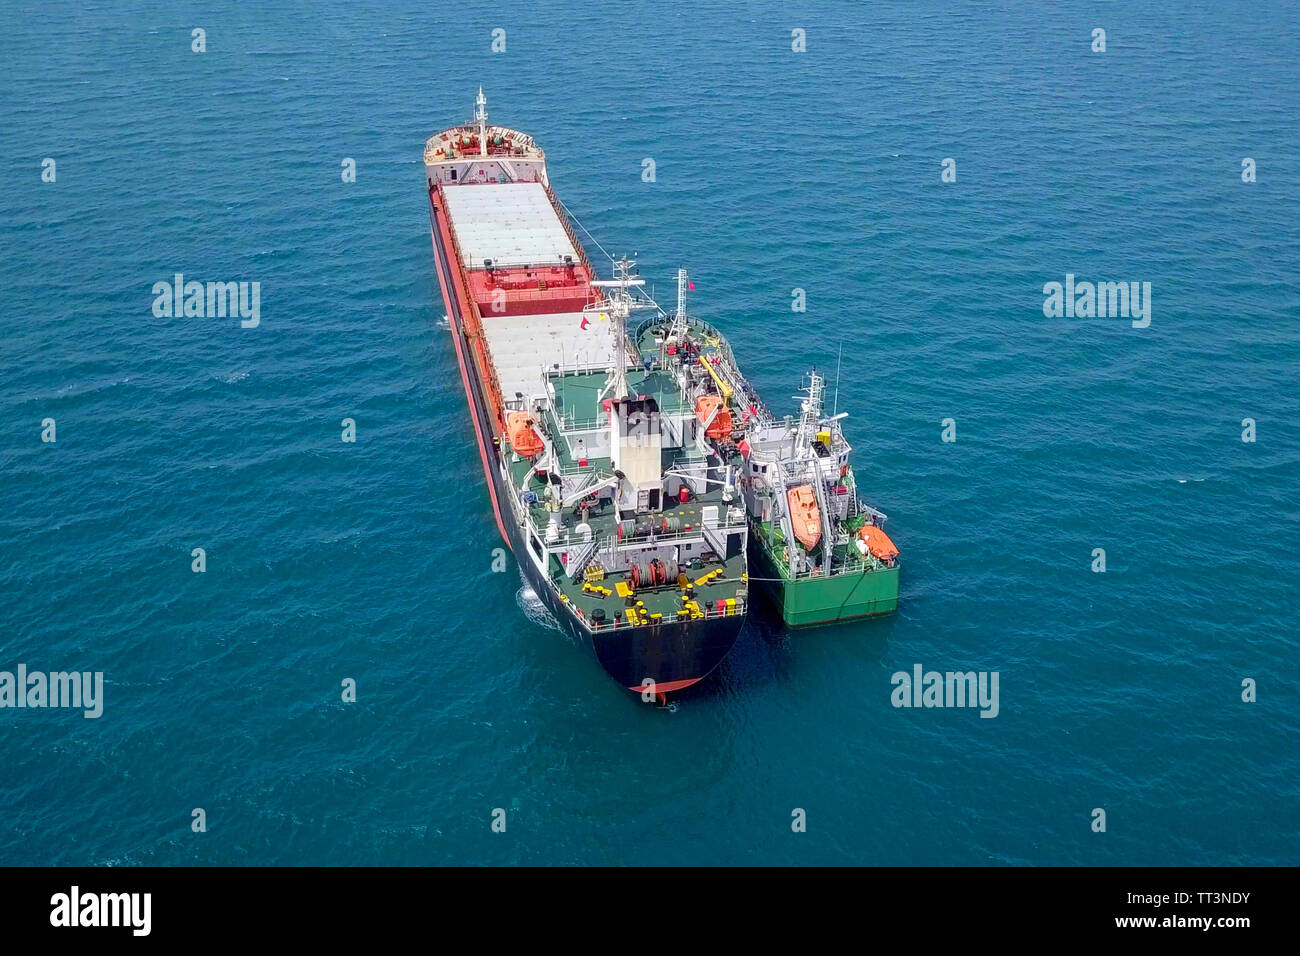 Refuelling at sea - Small Oil products ship fuelling a large Bulk carrier, aerial image. Stock Photo